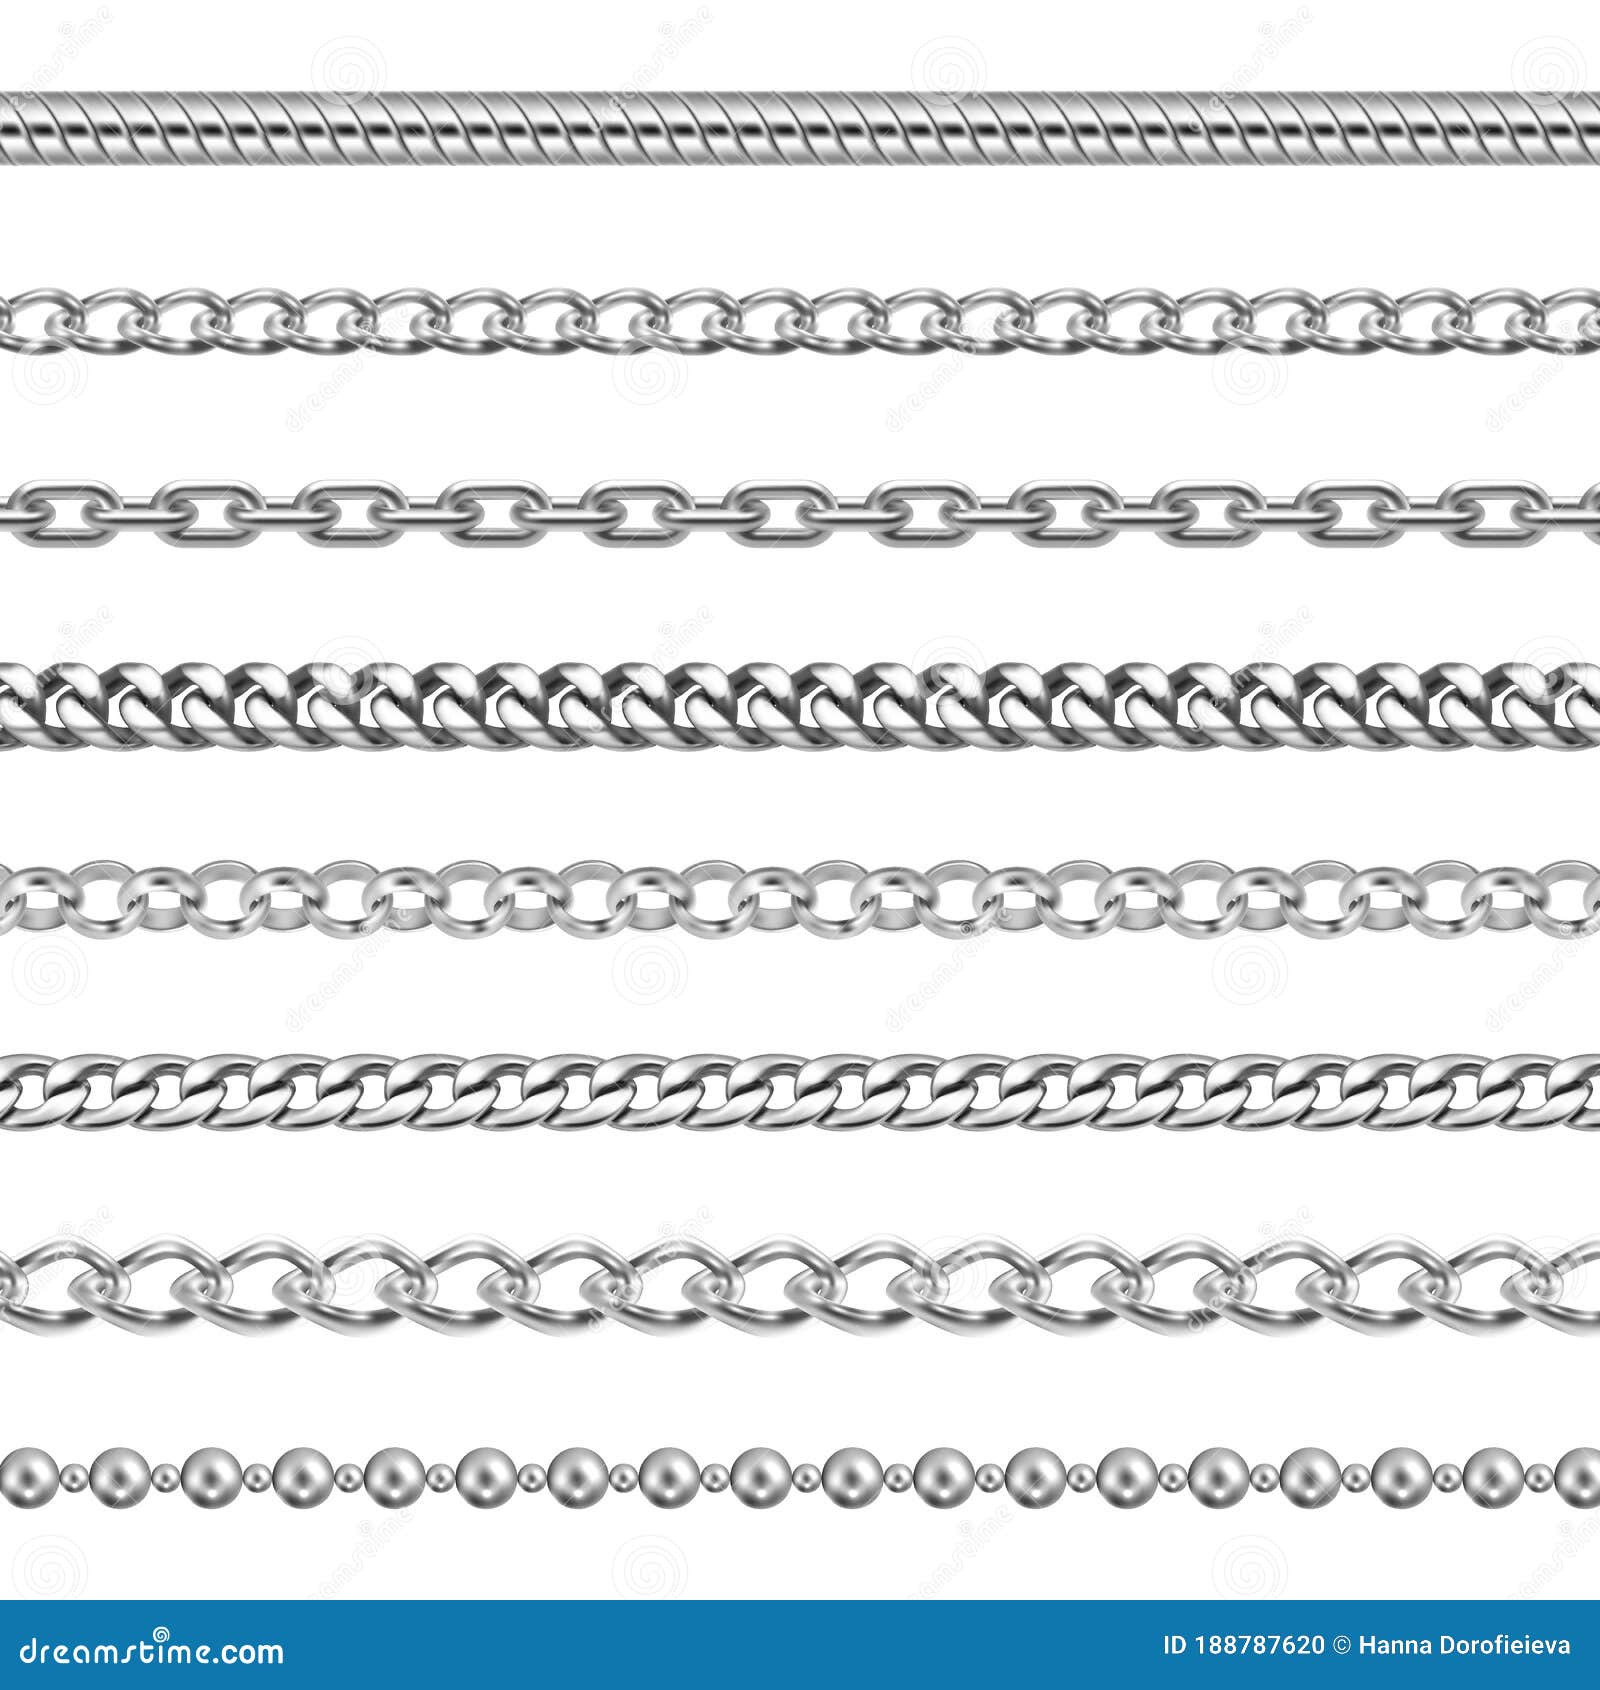 Silver Chains Jewelry Or Metal Links Pattern Stock Illustration